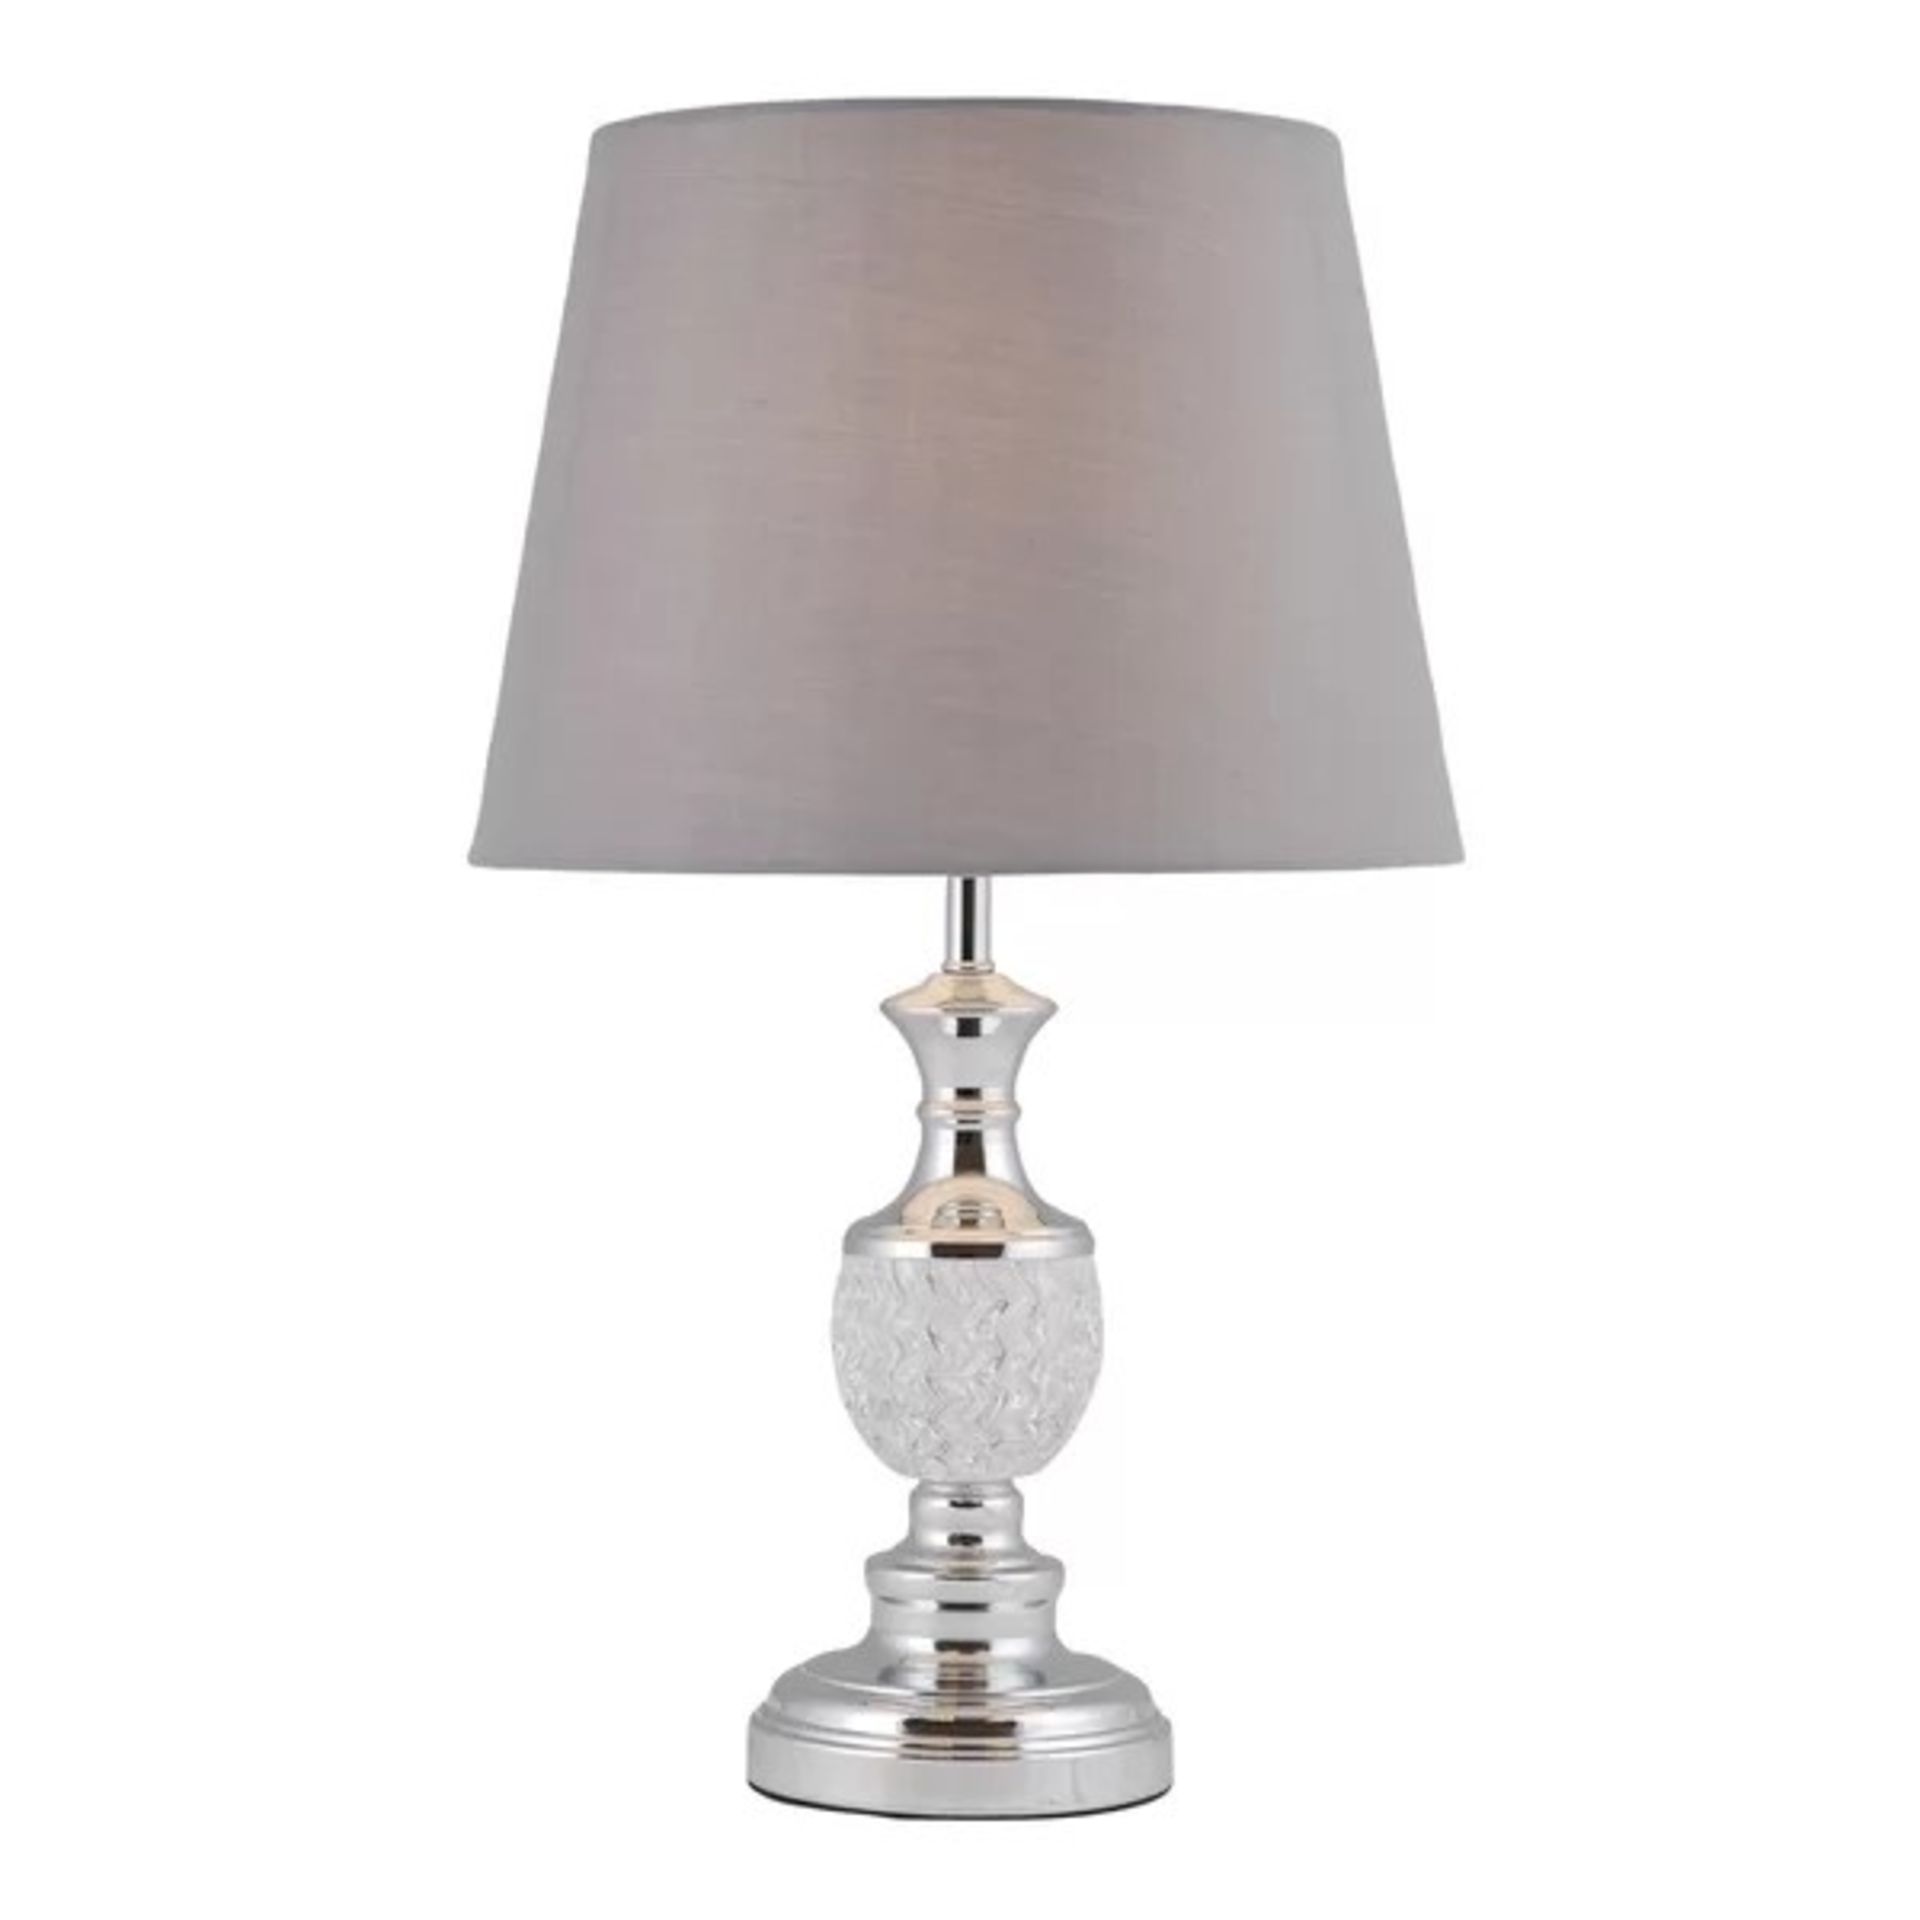 RRP £ 59.99 -Milton Moulded 24cm Table Lamp with grey shade - 48cm H x 28cm W x 28cm D